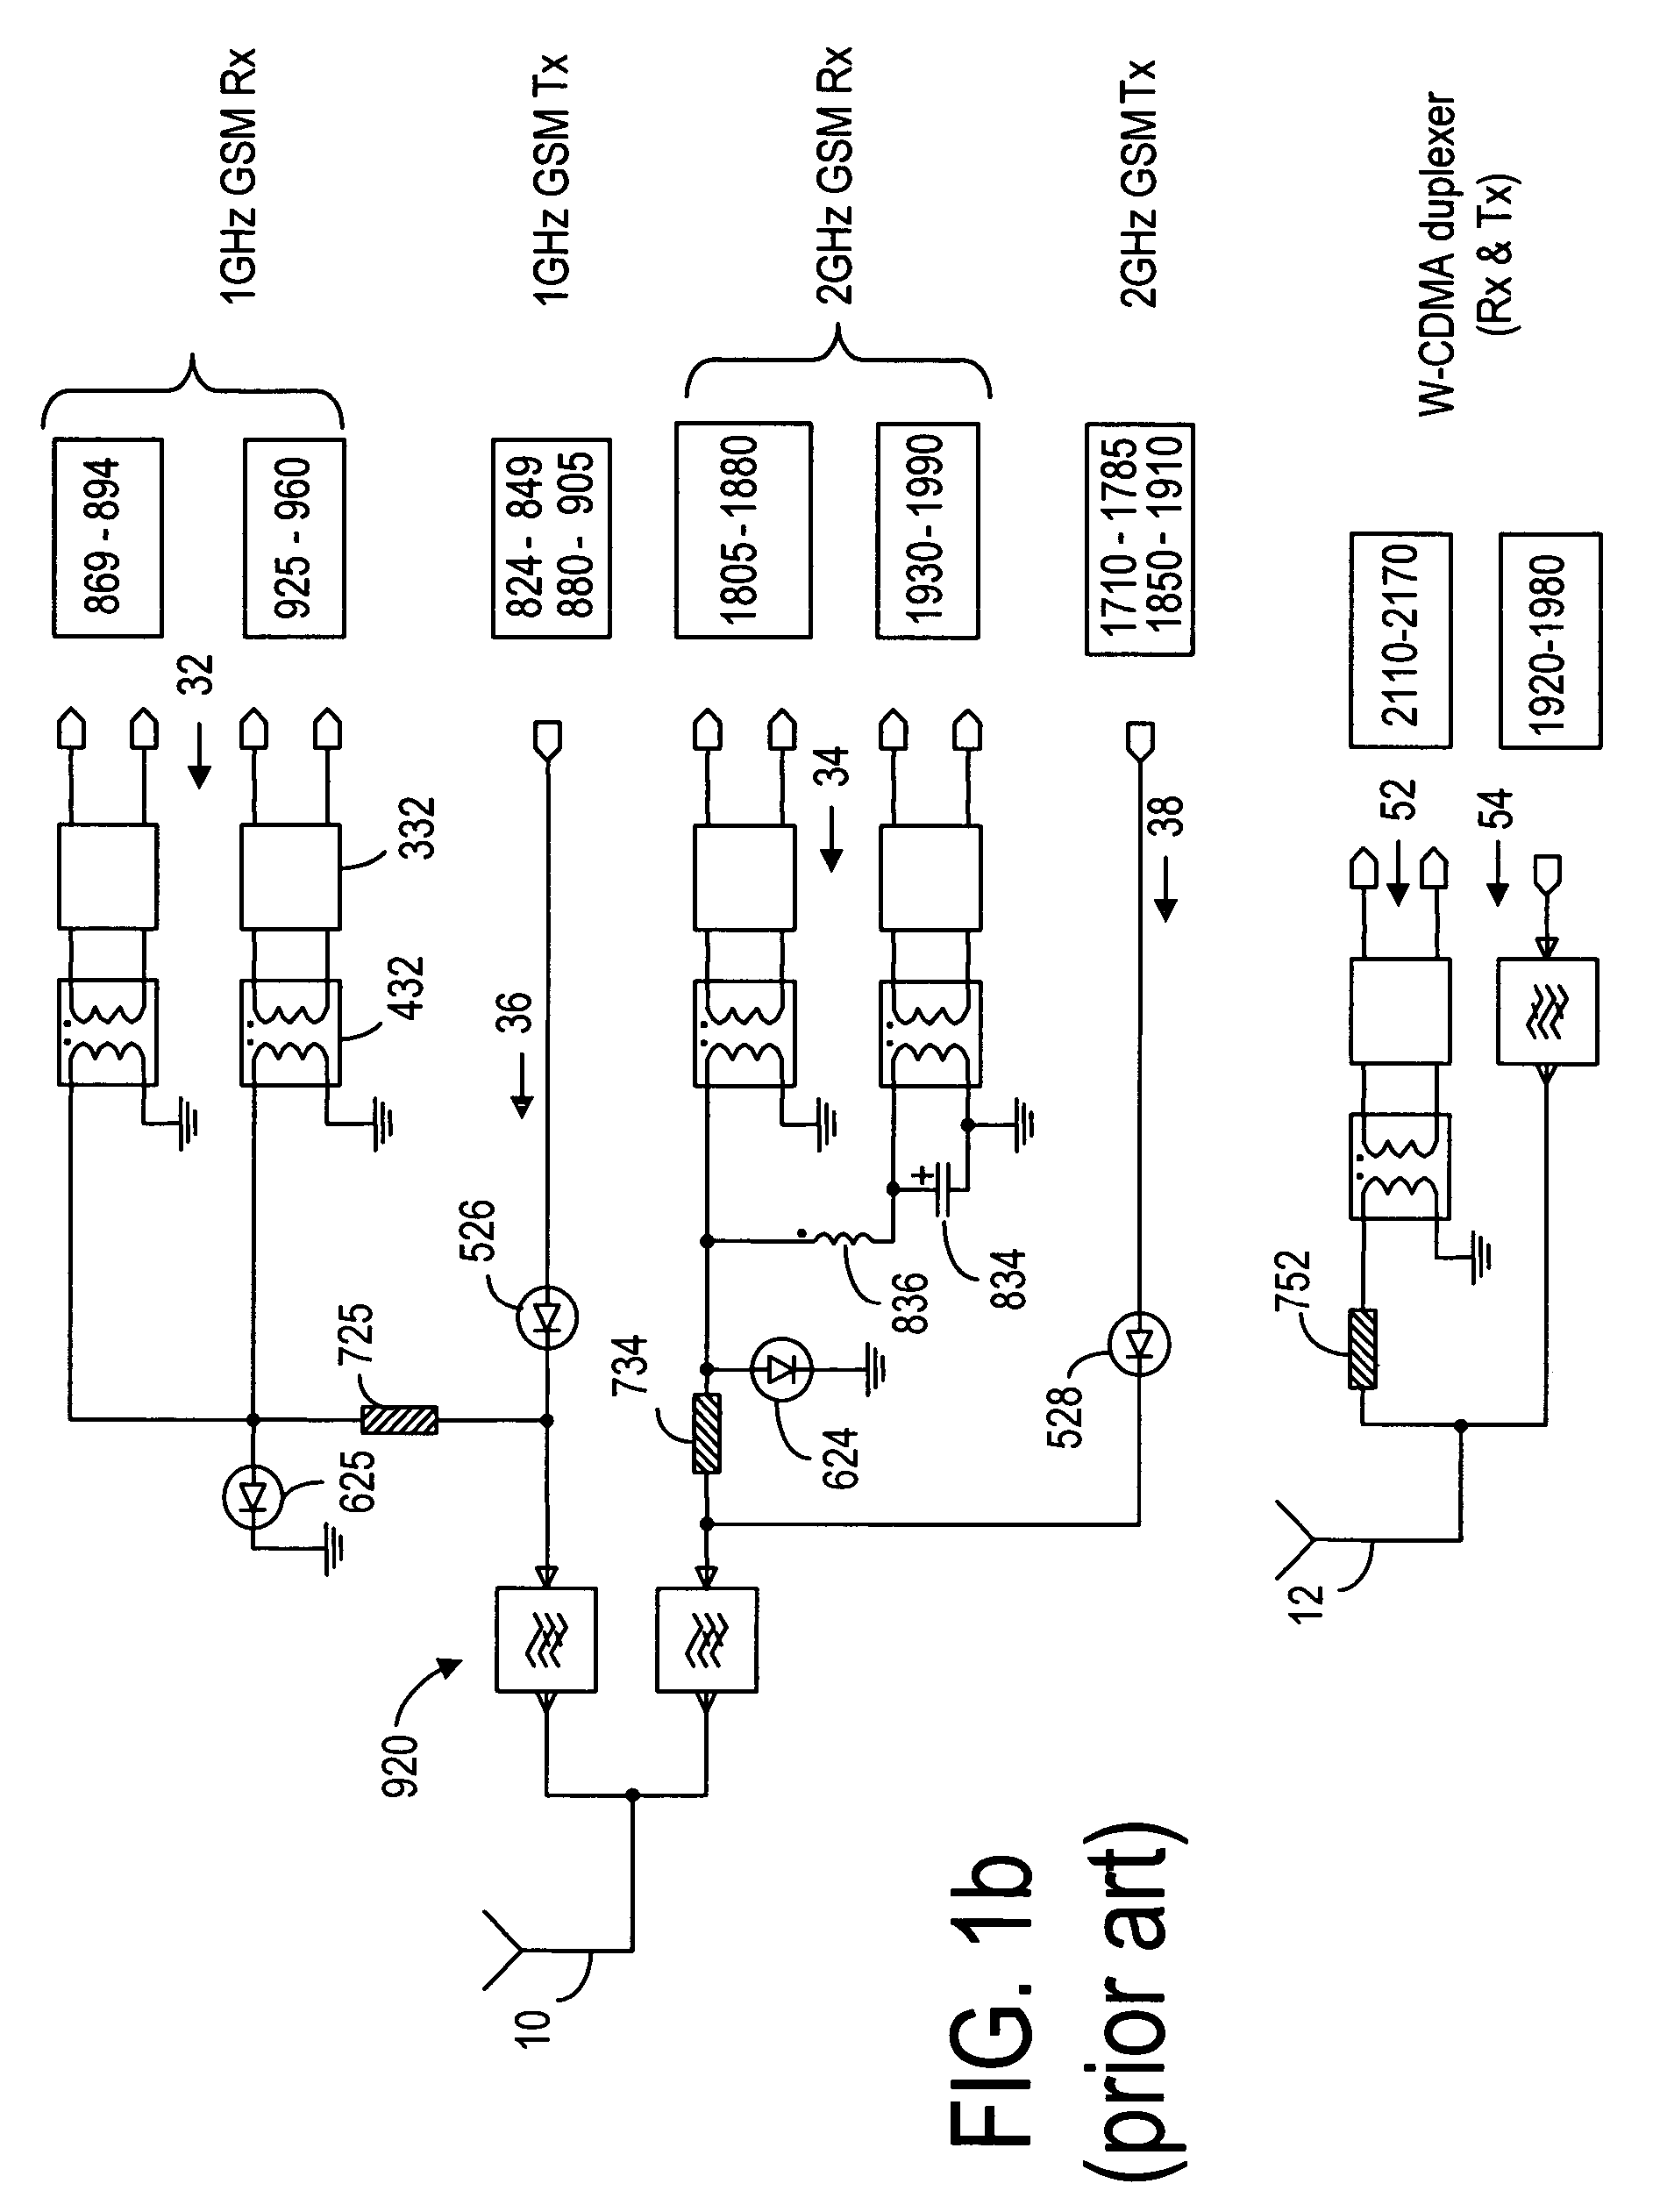 Method and device for selecting between internal and external antennas